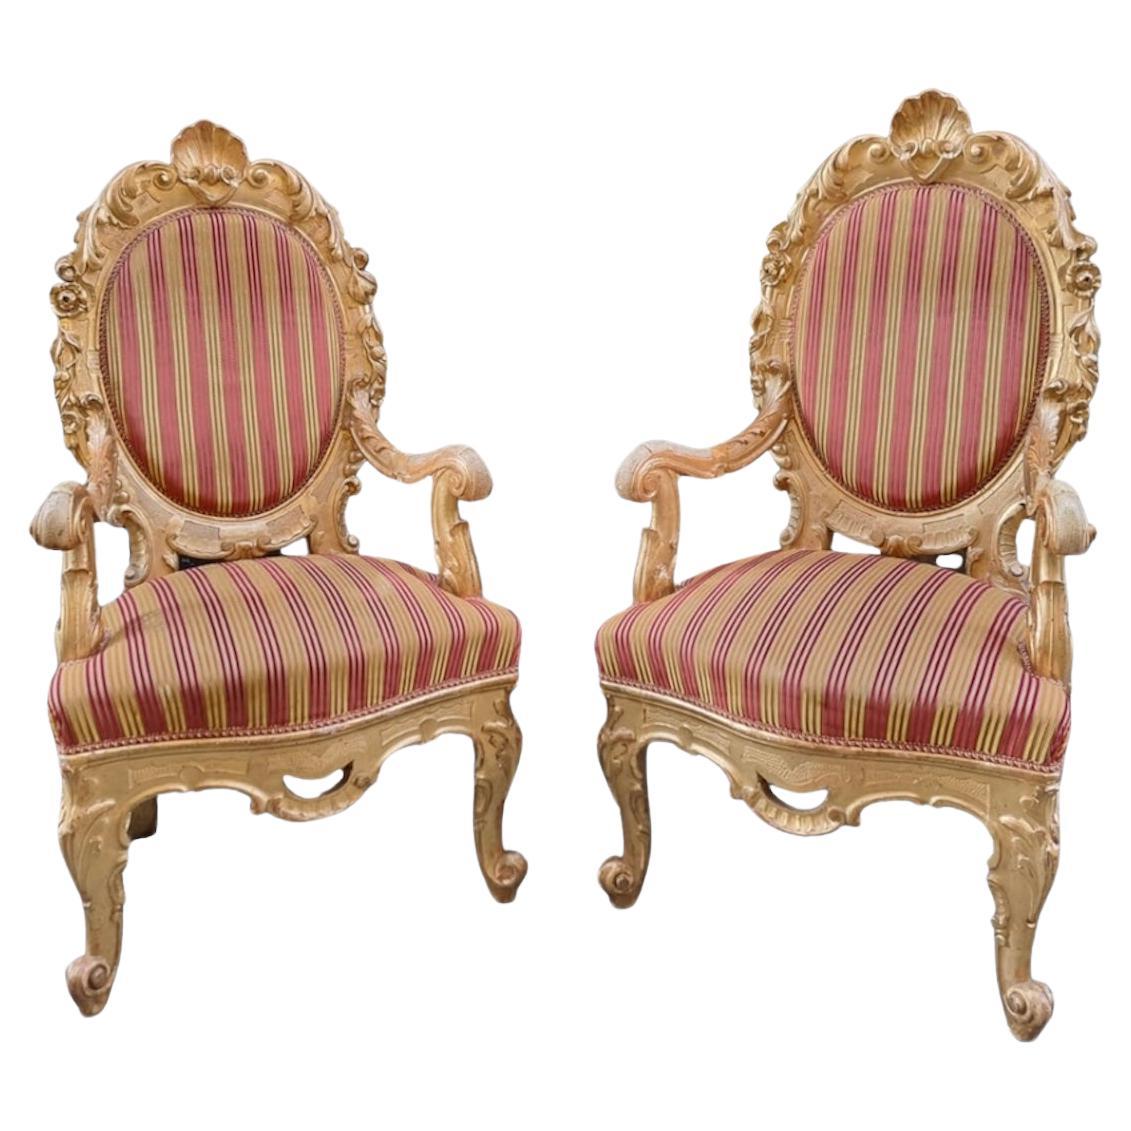 Pair of carved and gilded wooden armchairs, Rome, 19th century